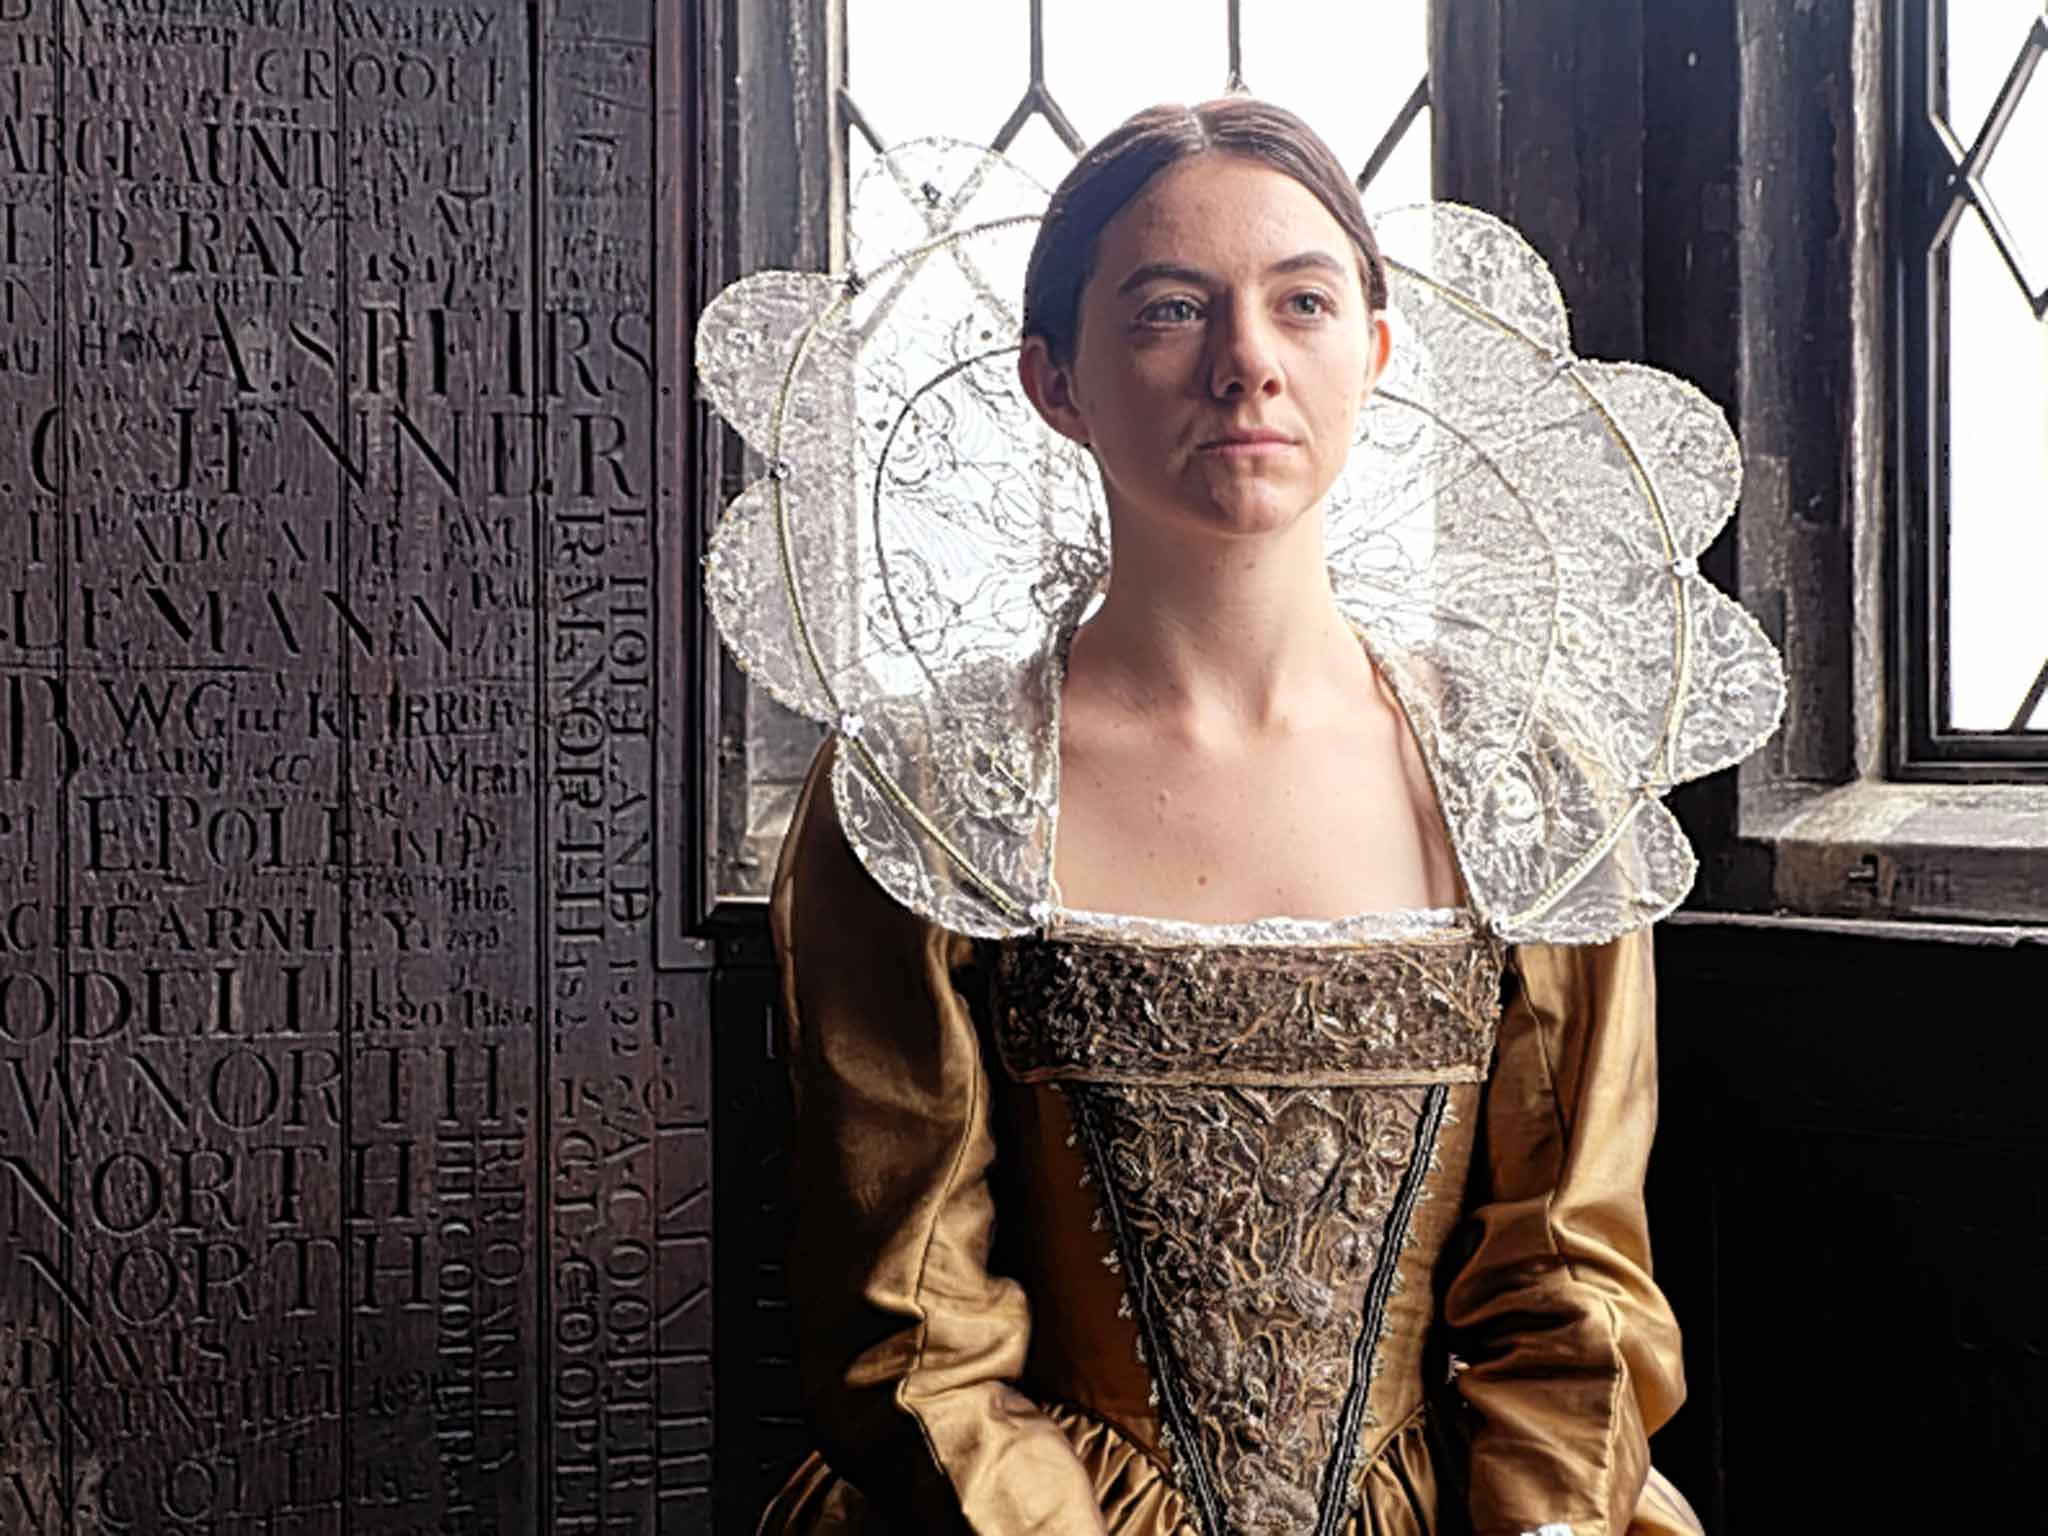 Ruff life: Beth Cooke as Mary, Queen of Scots in ‘Bloody Queens: Elizabeth and Mary’